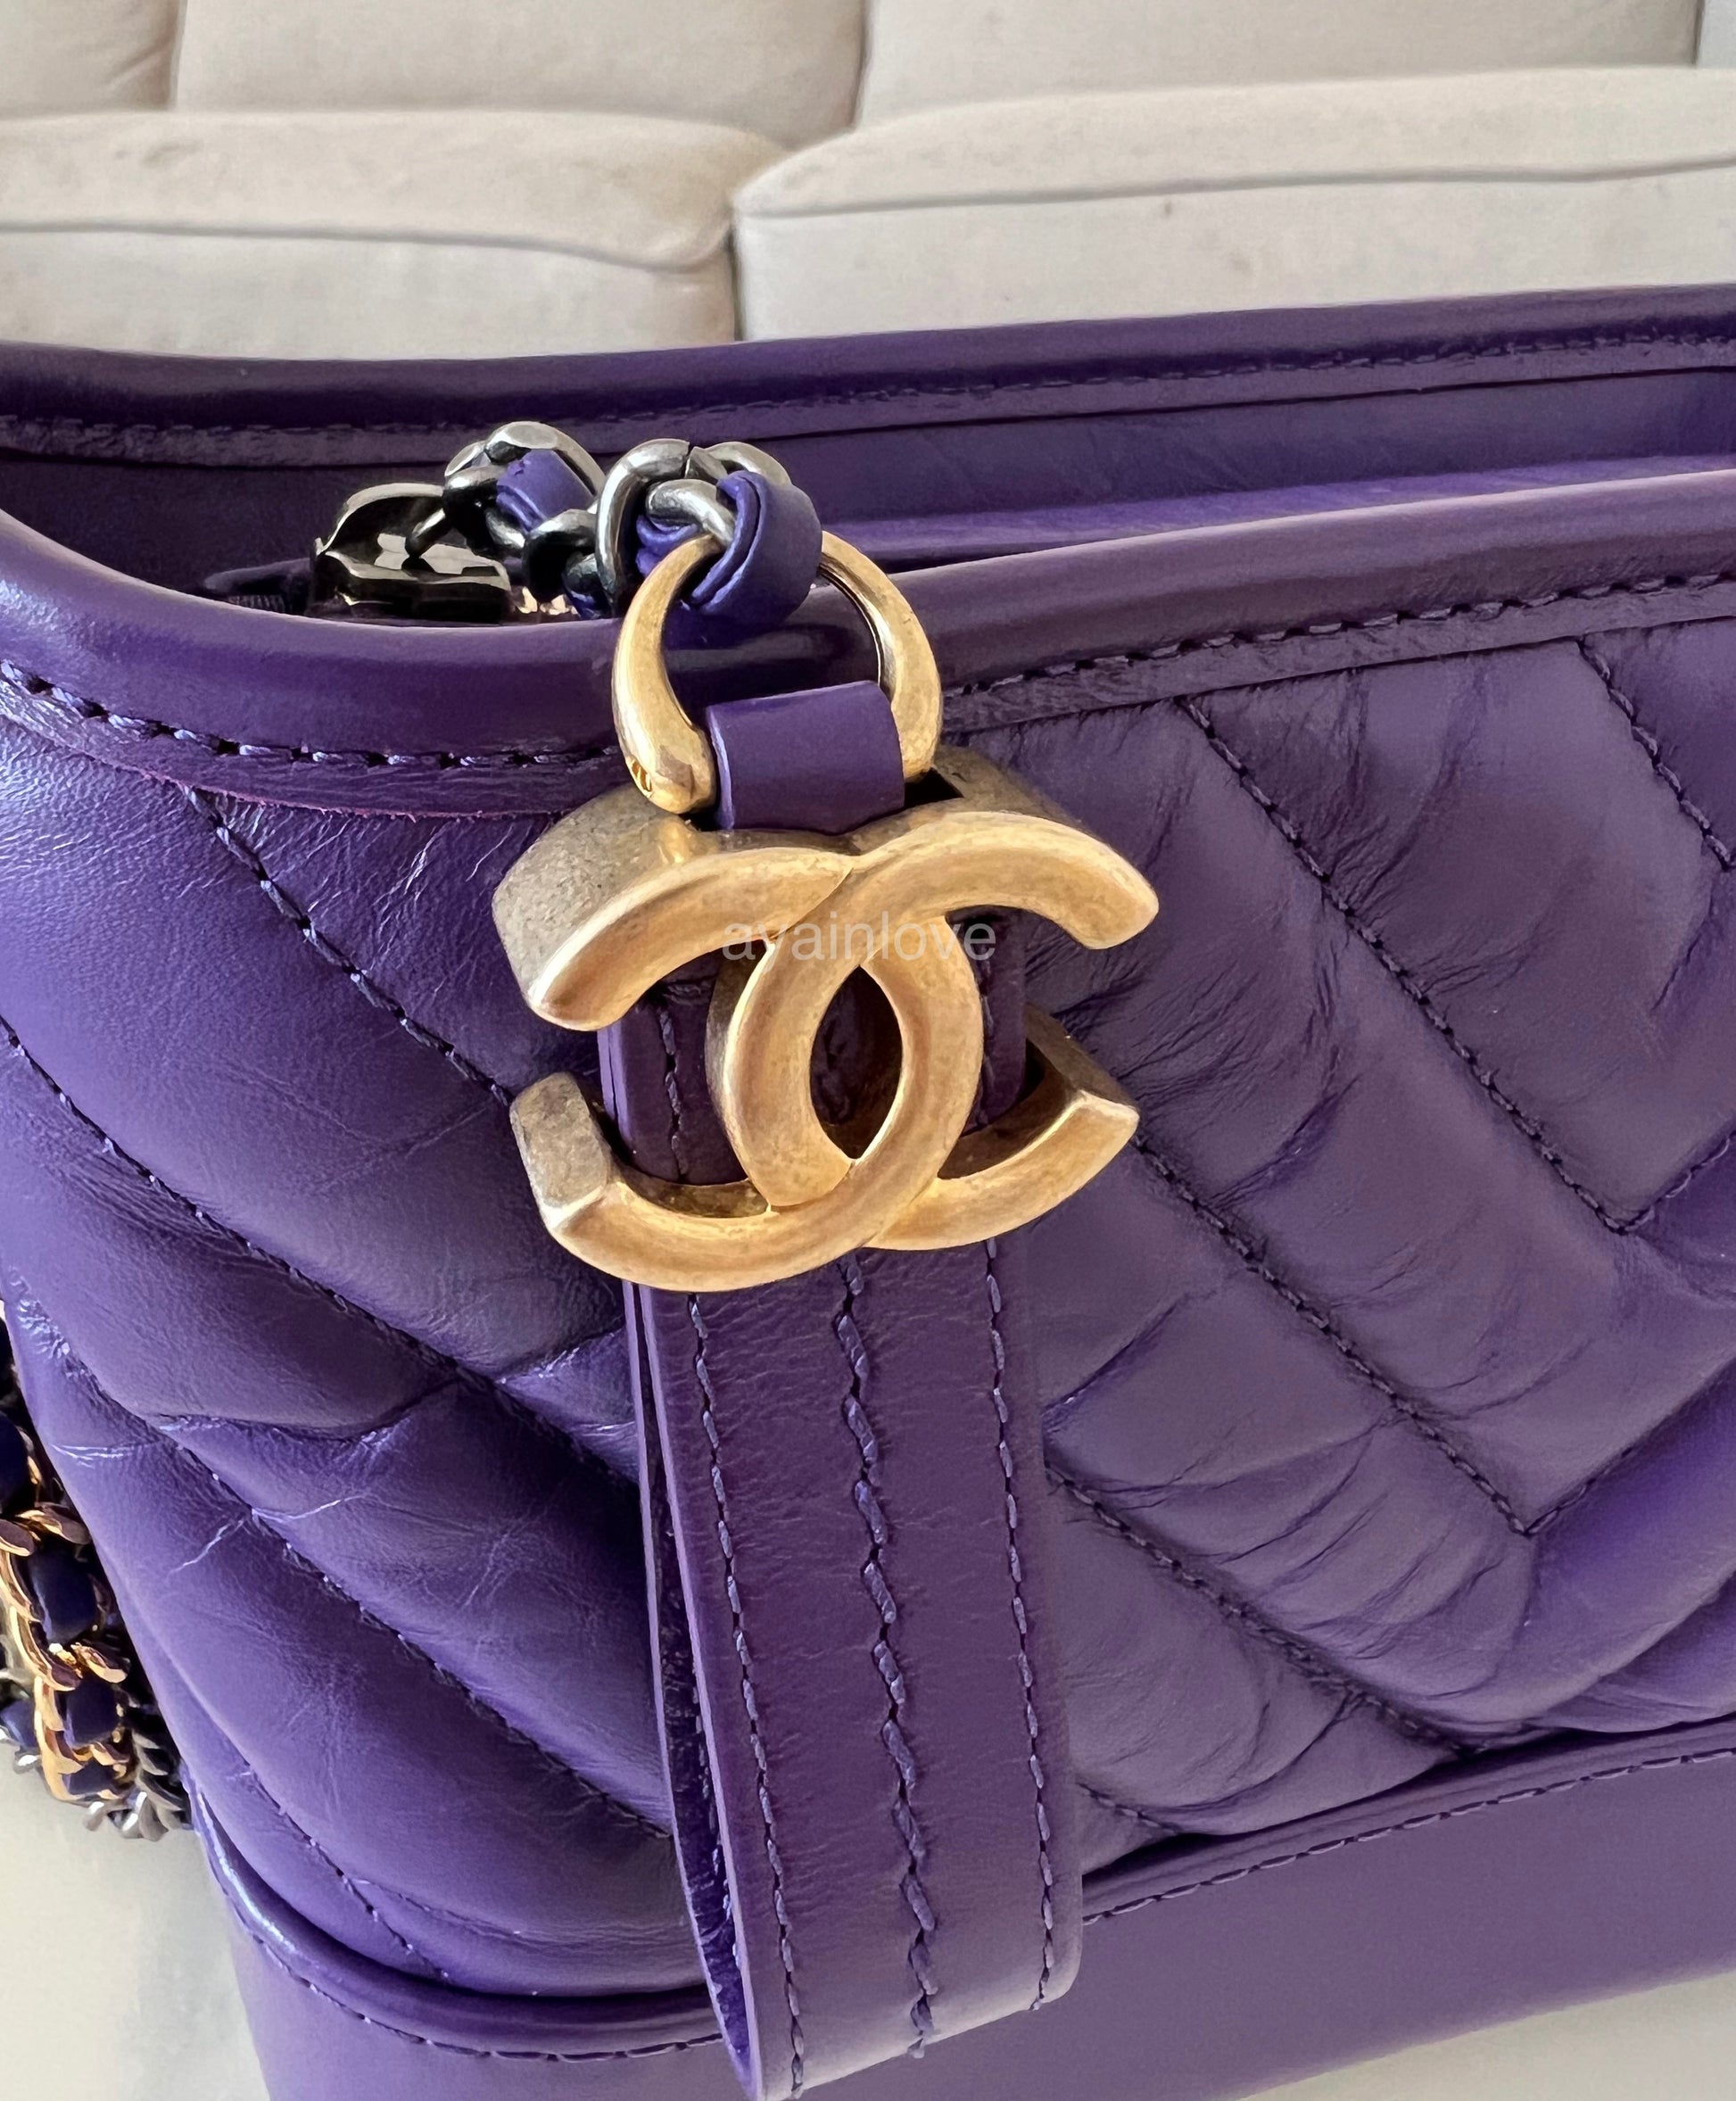 Chanel Gabrielle Tweed Blue/Red Handbag Certificate Of Authenticity and Box